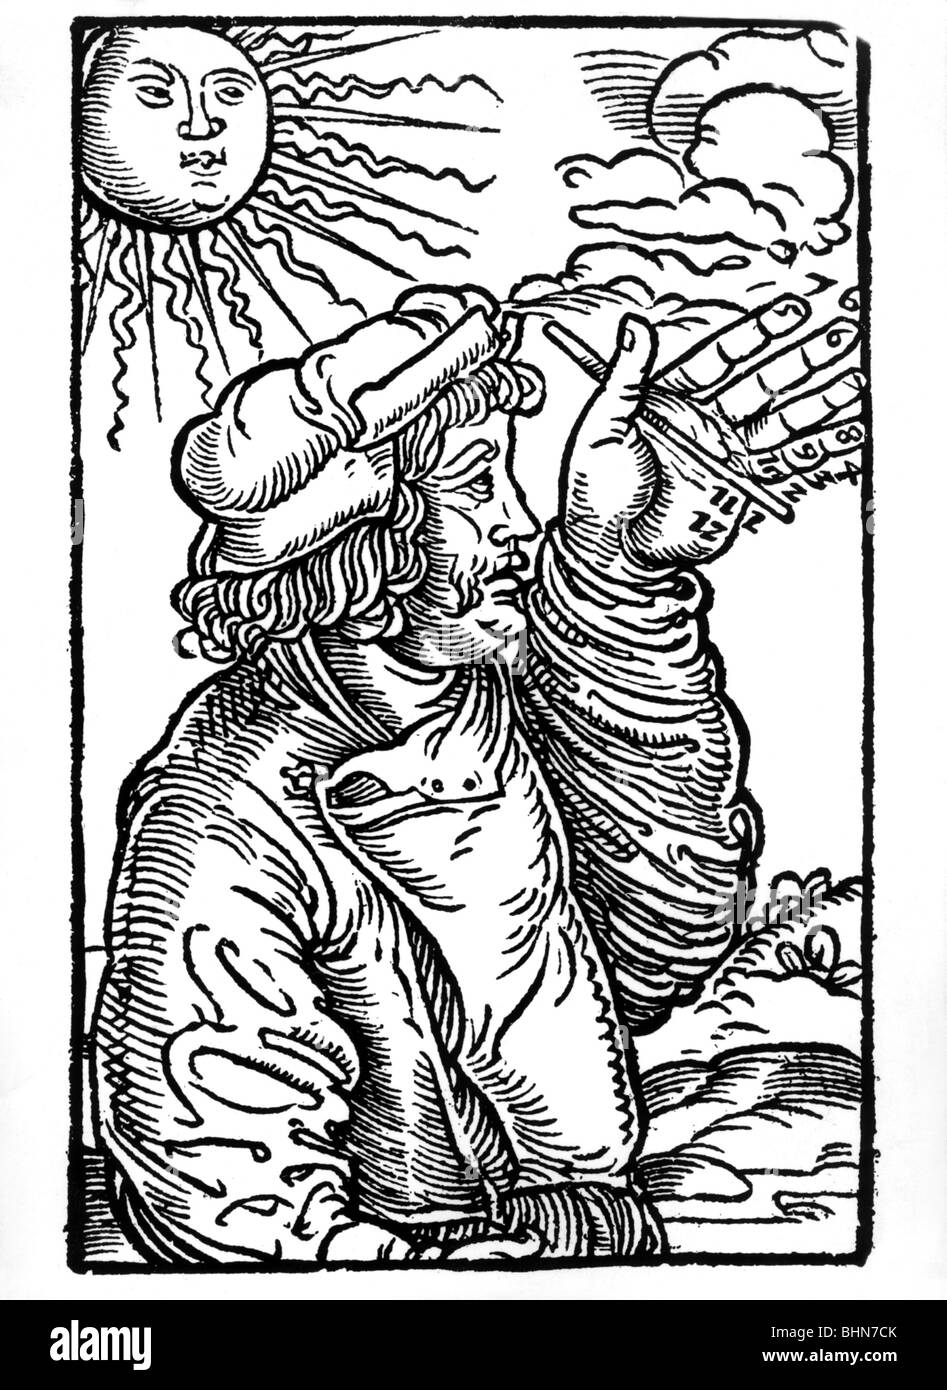 clocks, sundial, method to detecting the time with stick in the hand, woodcut, 16th century, historic, historical, sundials, medieval times, Middle Ages, sun, clock, shade, Arab, Arab, Arabic, Arabian , Arab numbers, finger, sunset, chronometry, chronometries, horology, people, Stock Photo